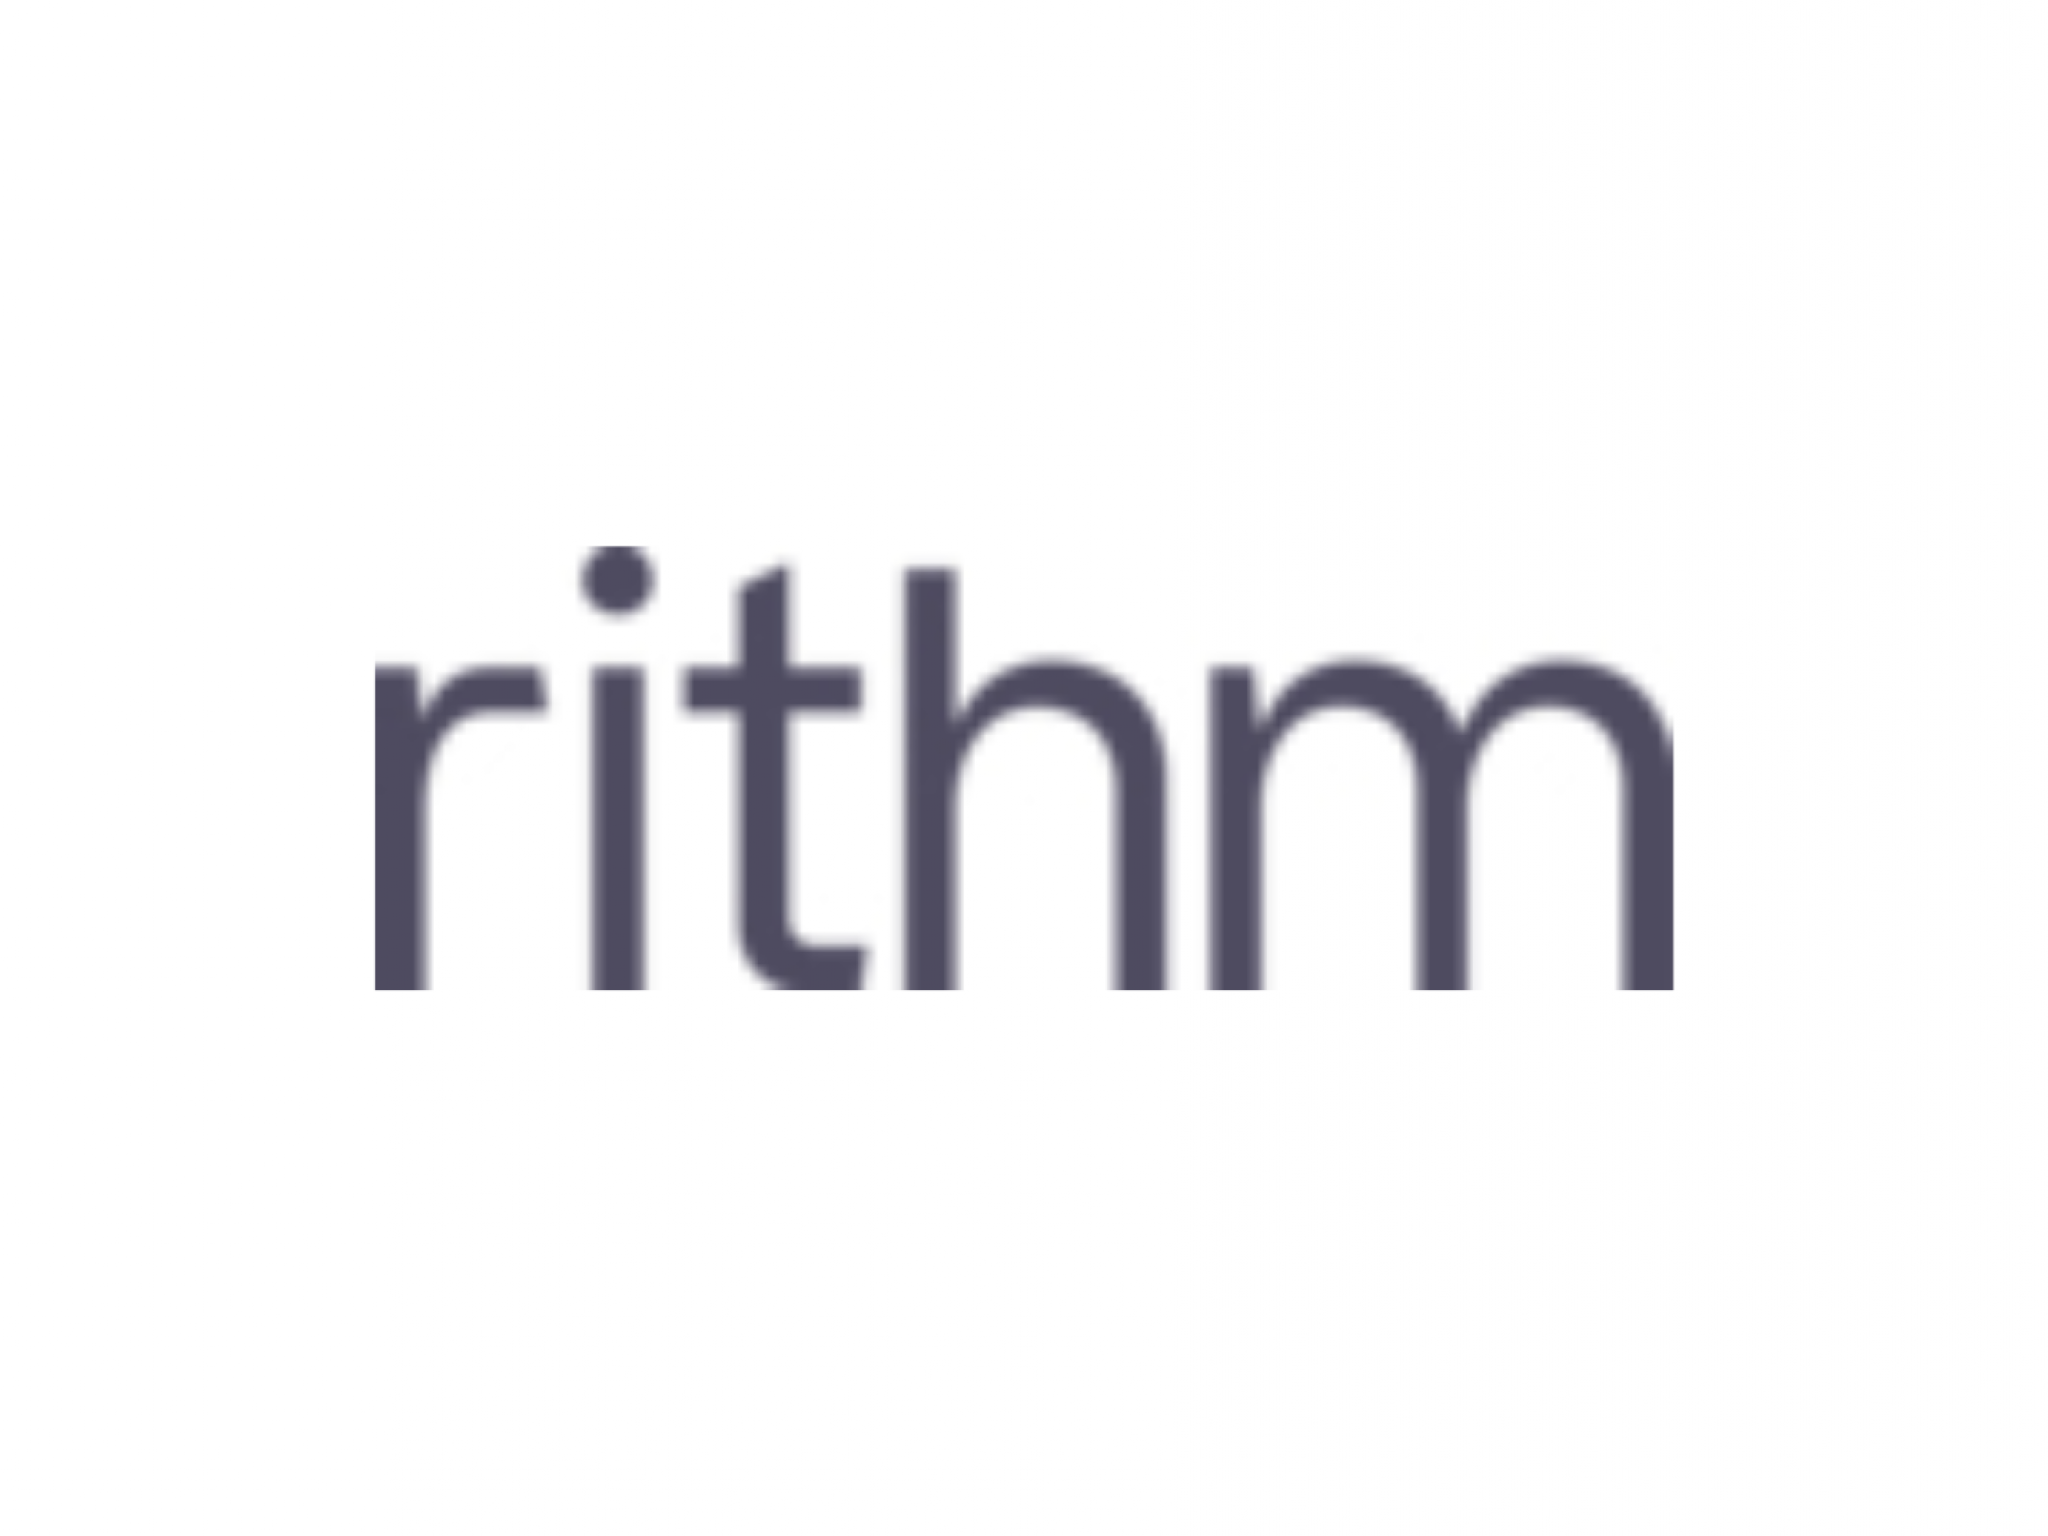  rithm-capital-buys-specialized-loan-servicing-business-boosts-third-party-servicing-business-to-180b 